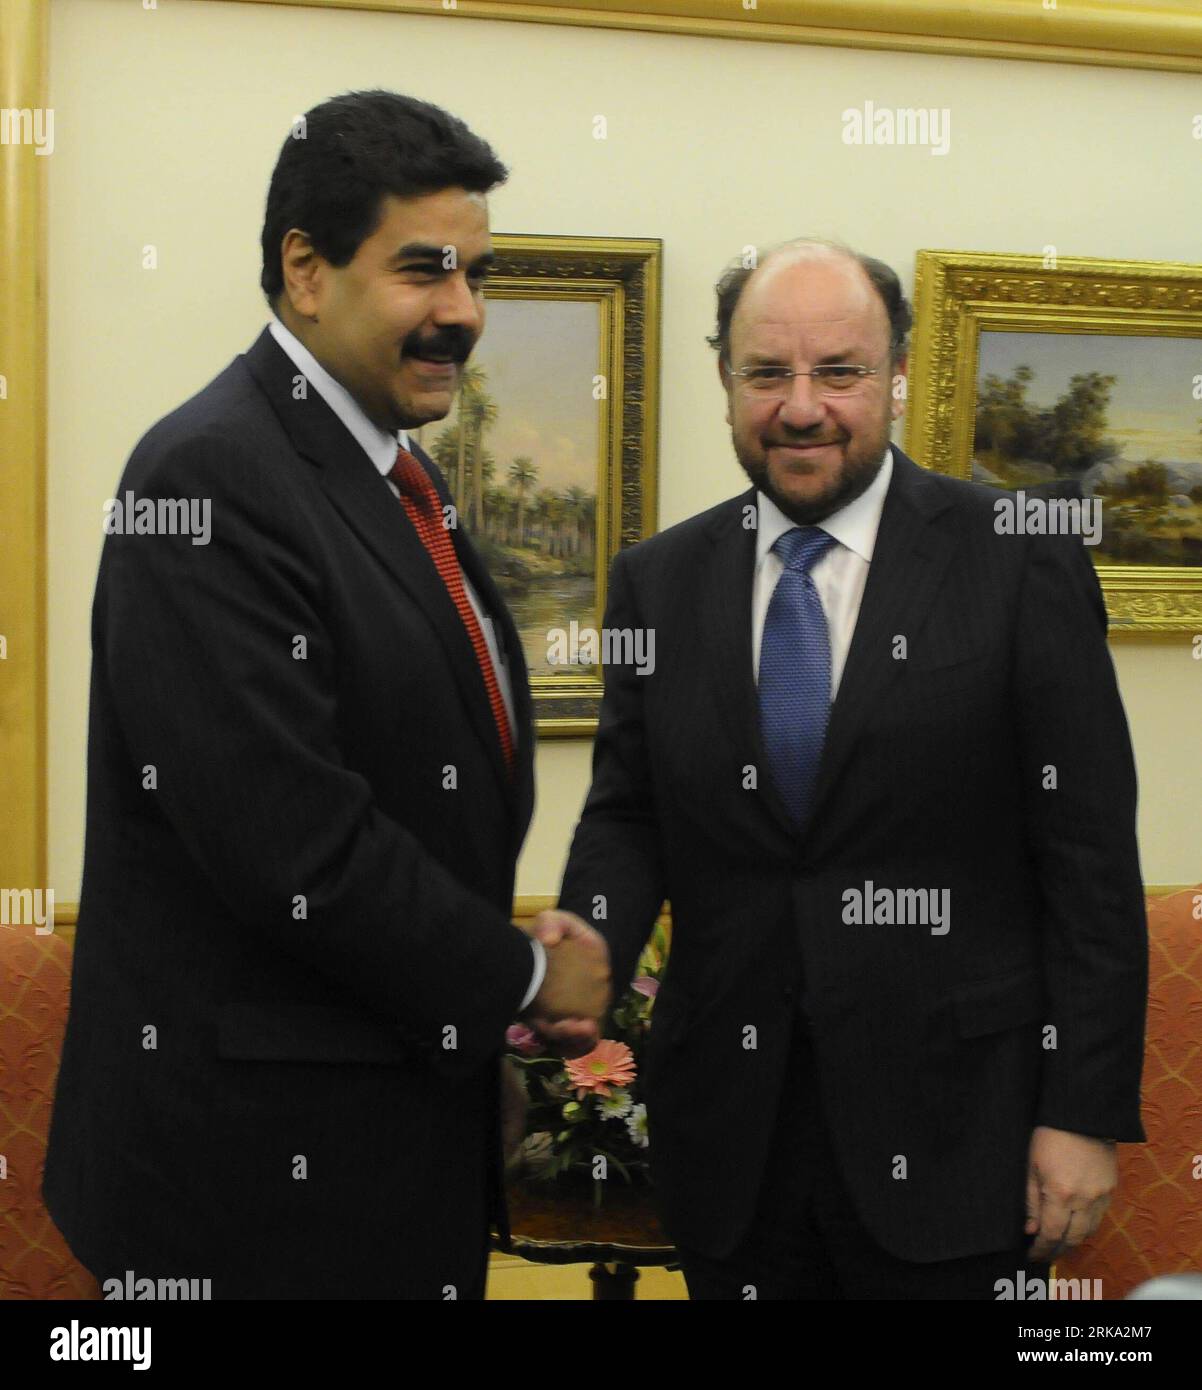 Bildnummer: 54259618  Datum: 27.07.2010  Copyright: imago/Xinhua (100728) -- SANTIAGO, July 28, 2010 (Xinhua) -- Venezuelan Foreign Minister Nicolas Maduro (L) meets with his Chilean counterpart Alfredo Moreno in Santiago July 27, 2010. Nicolas Maduro, who has been on a tour of seven Latin American countries since Monday, said Tuesday it was possible for Venezuela to restore ties with Colombia if the neighboring country s new president  was less hostile. (Xinhua/Victor Rojas) CHILE-SANTIAGO-VENEZUELA S FM-VISIT PUBLICATIONxNOTxINxCHN People Politik kbdig xcb 2010 quadrat premiumd xint    Bildn Stock Photo